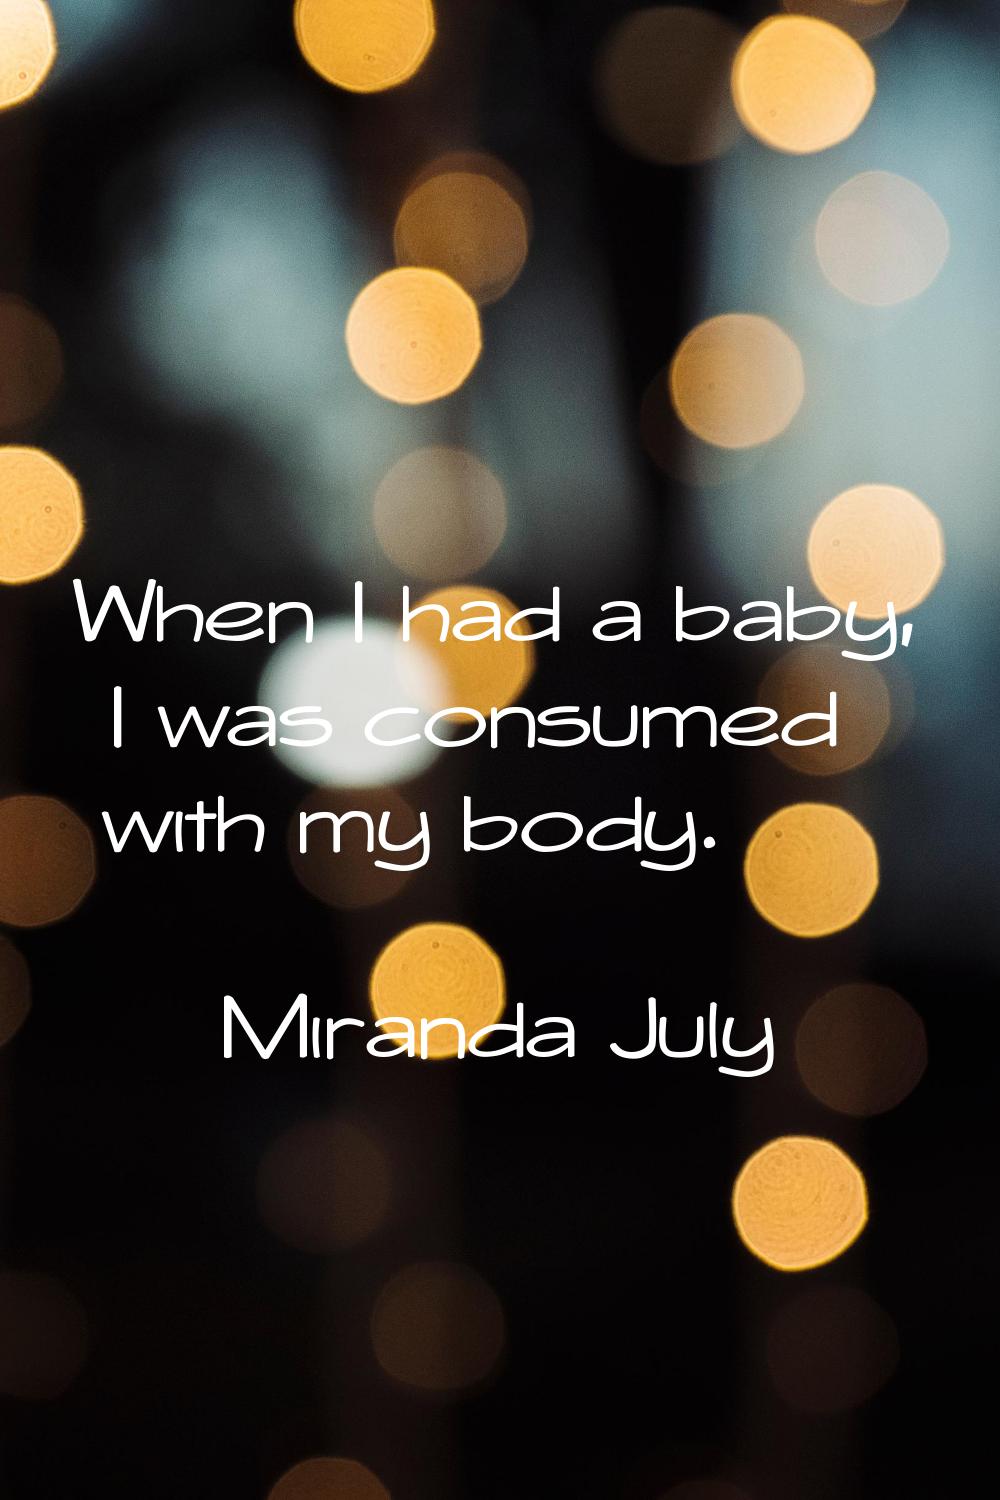 When I had a baby, I was consumed with my body.